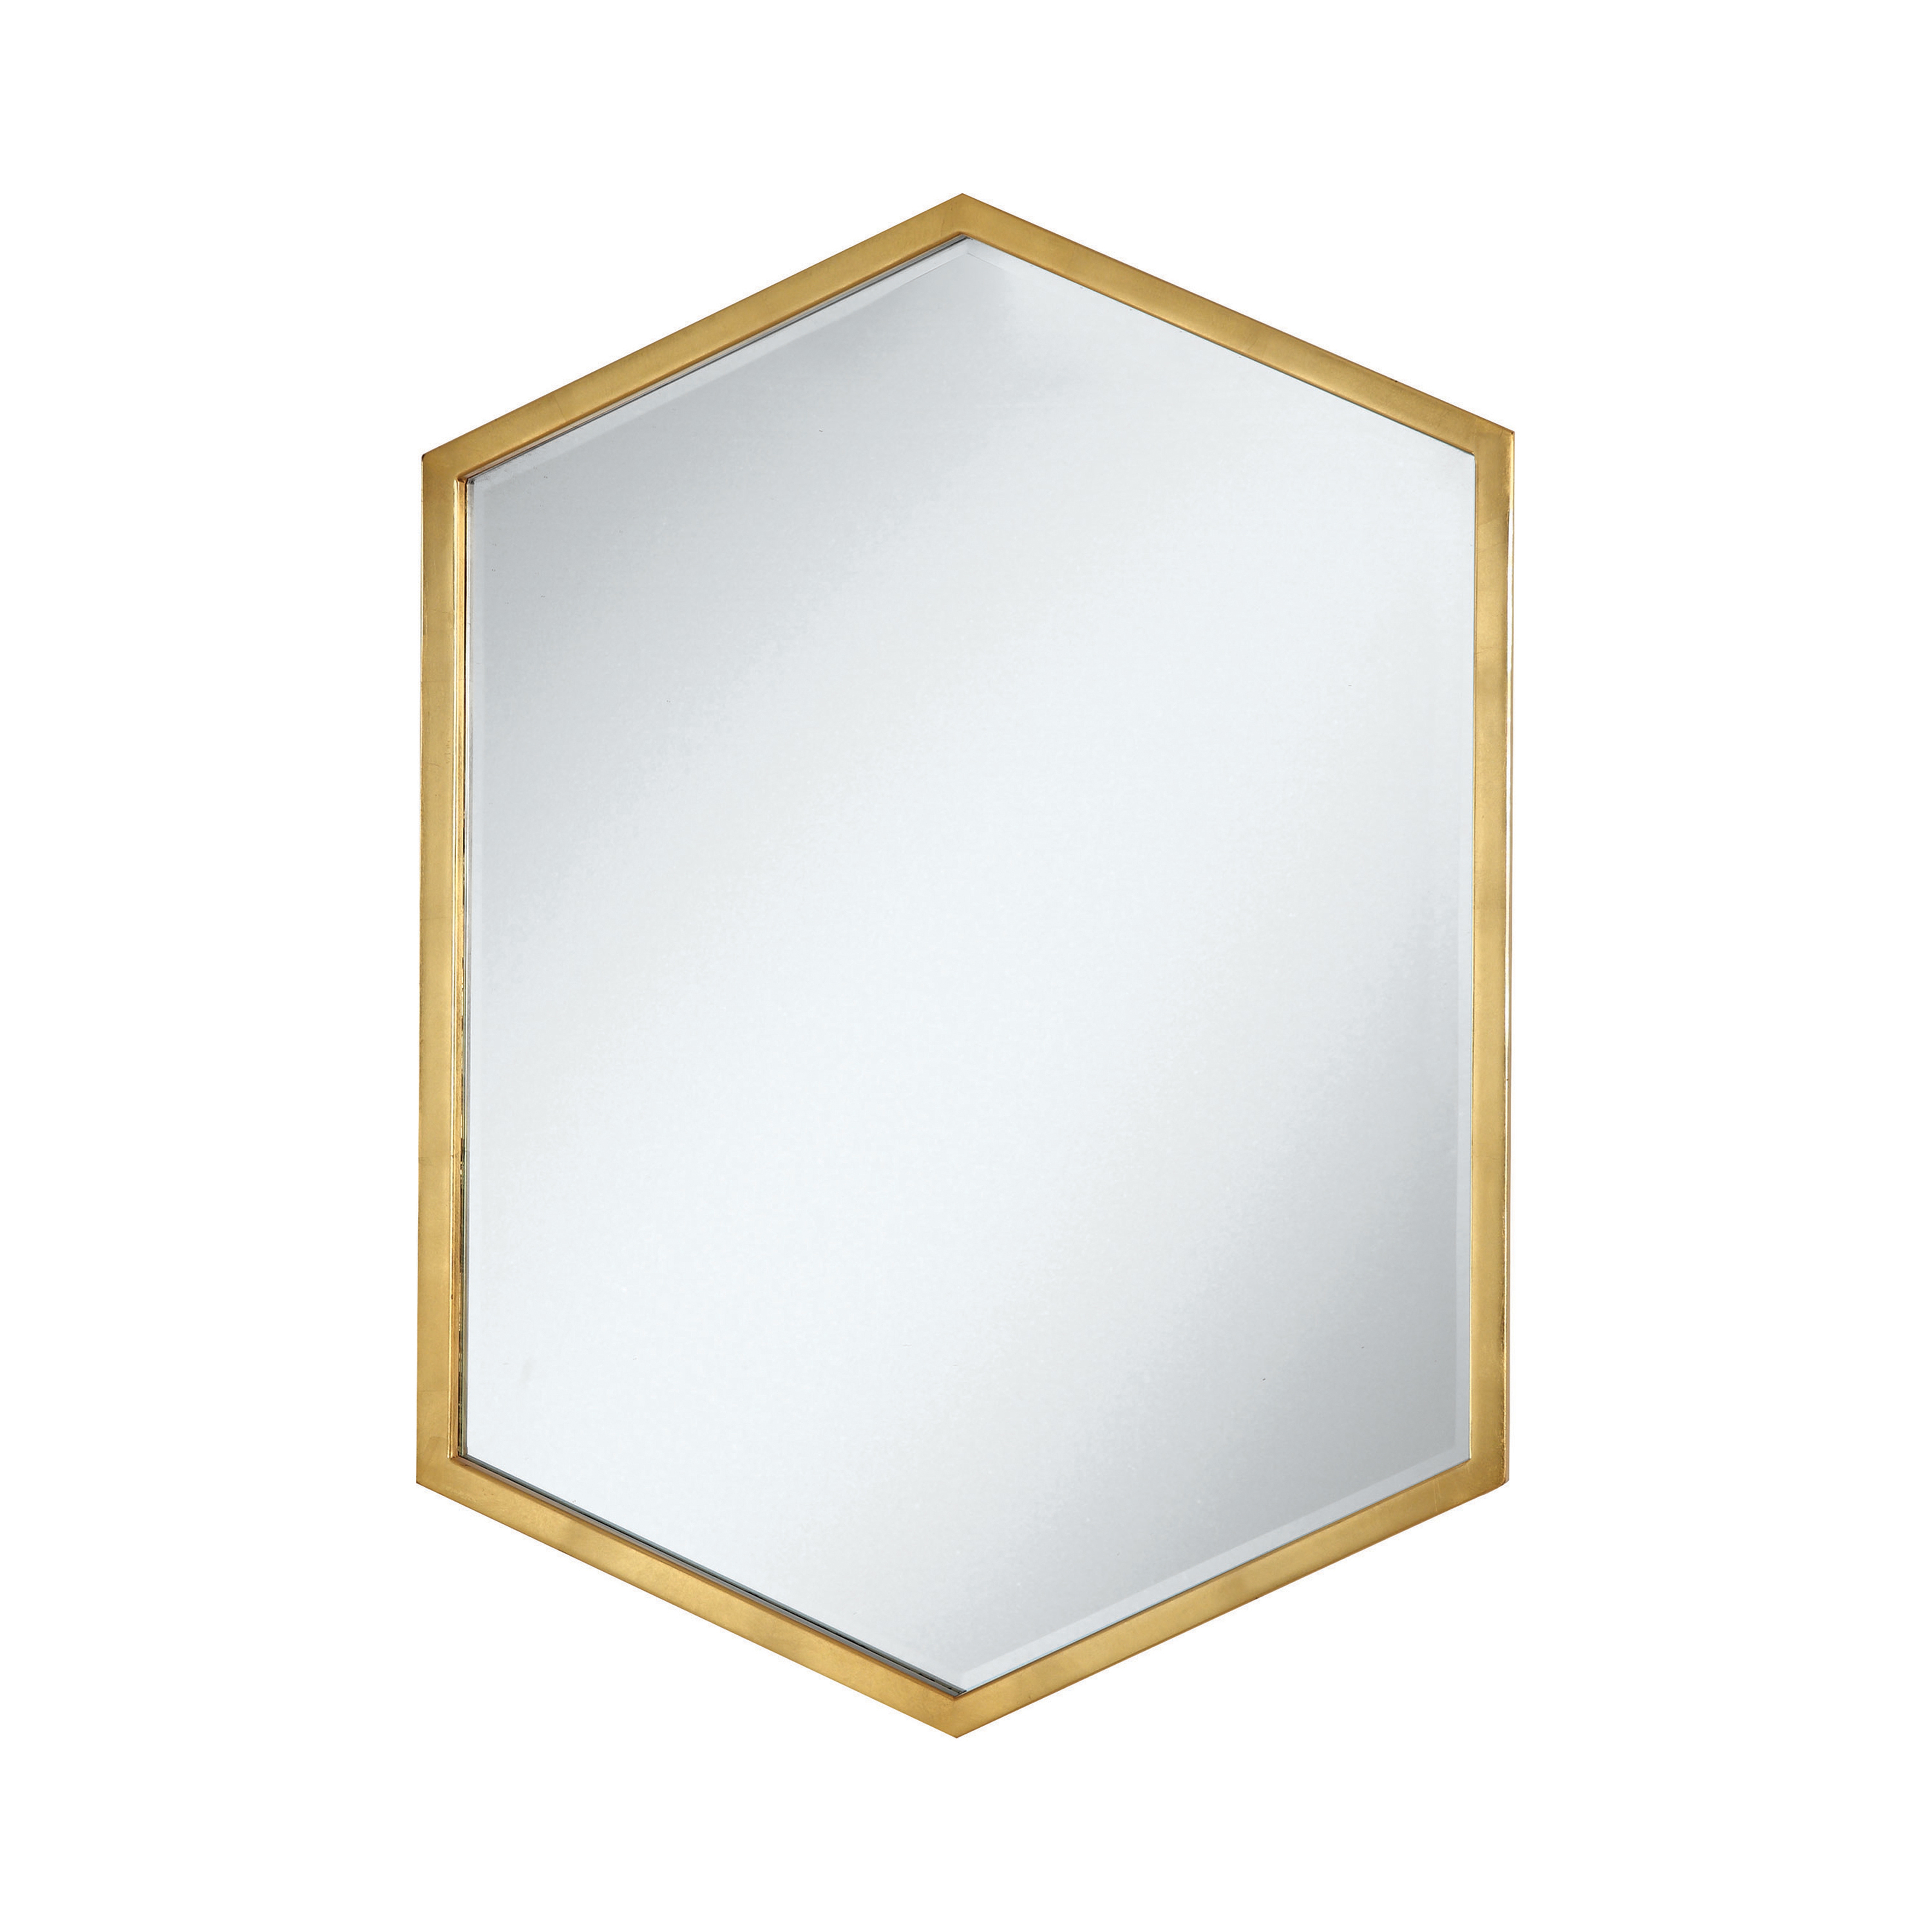 Hexagon Shaped Wall Mirror Gold - Harwich Collection